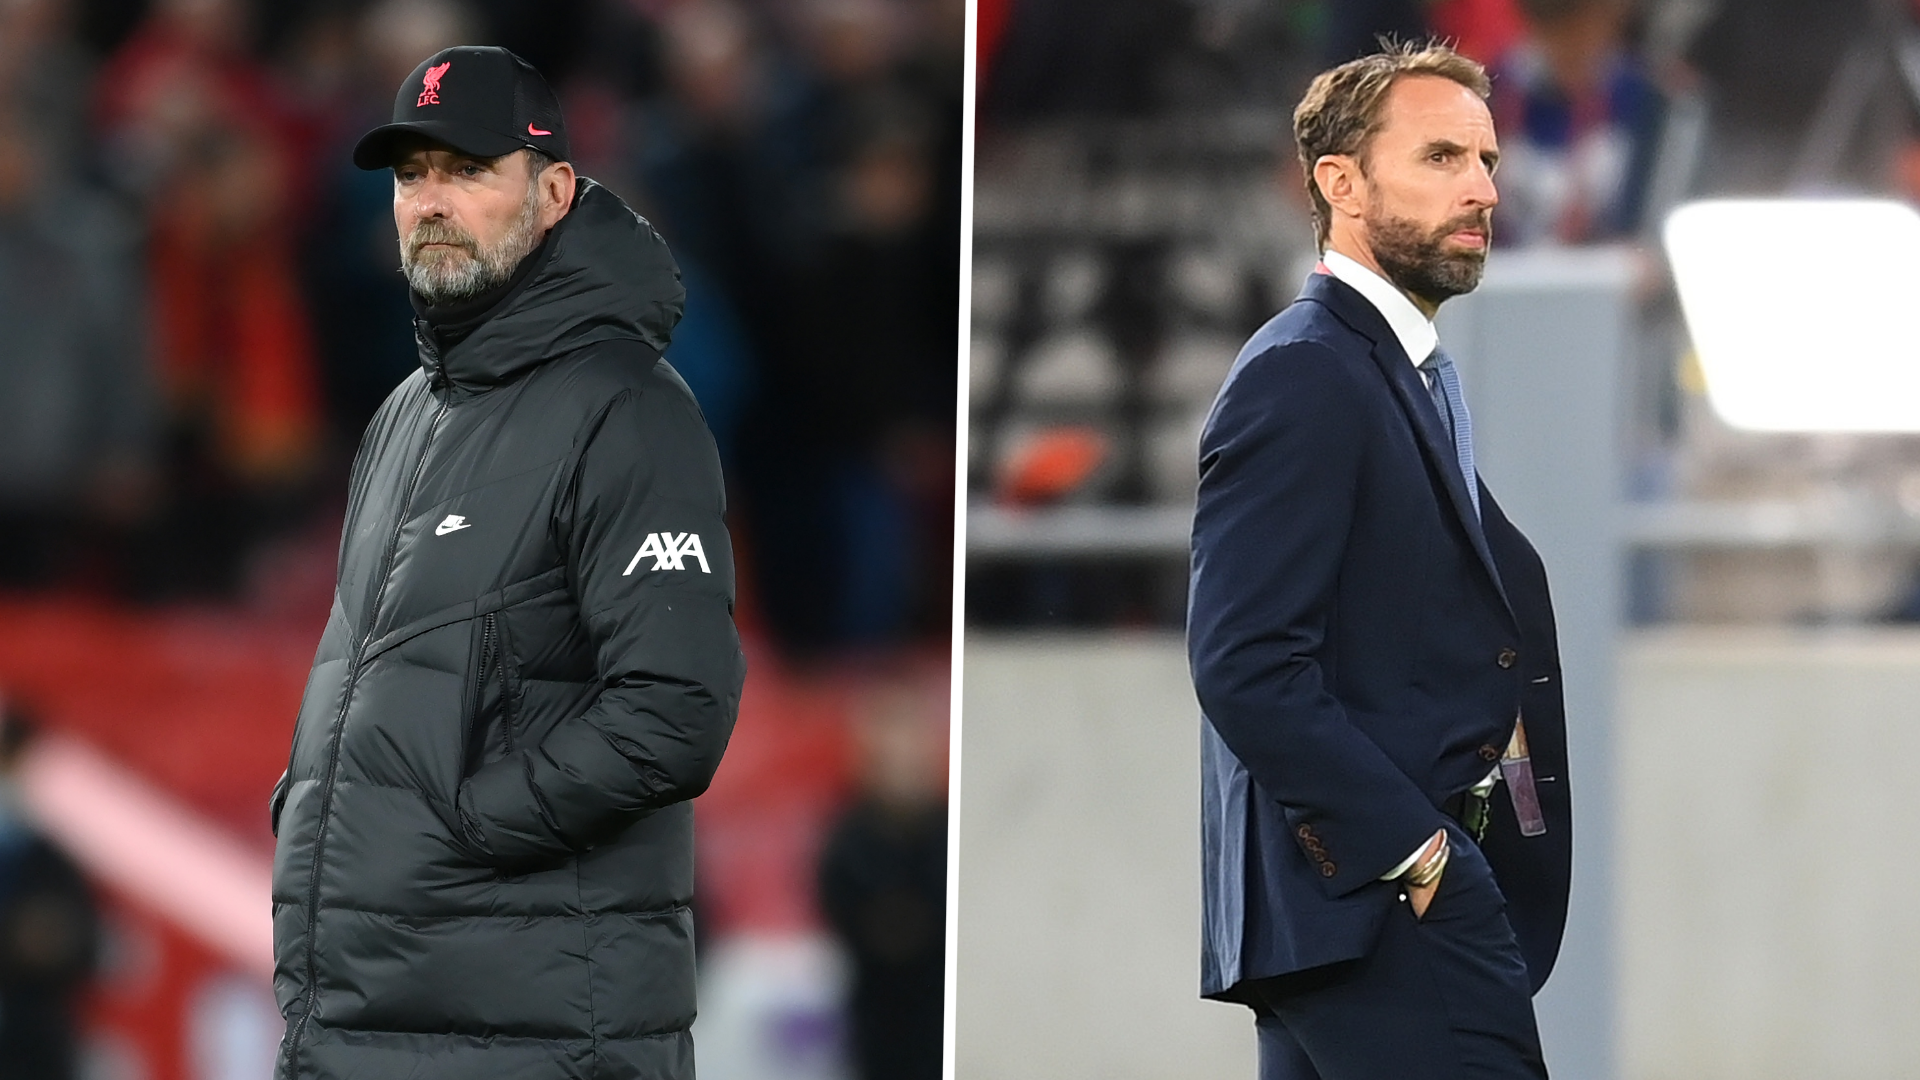 'I don't know why he's having a swing' - England boss Southgate puzzled by Klopp criticism